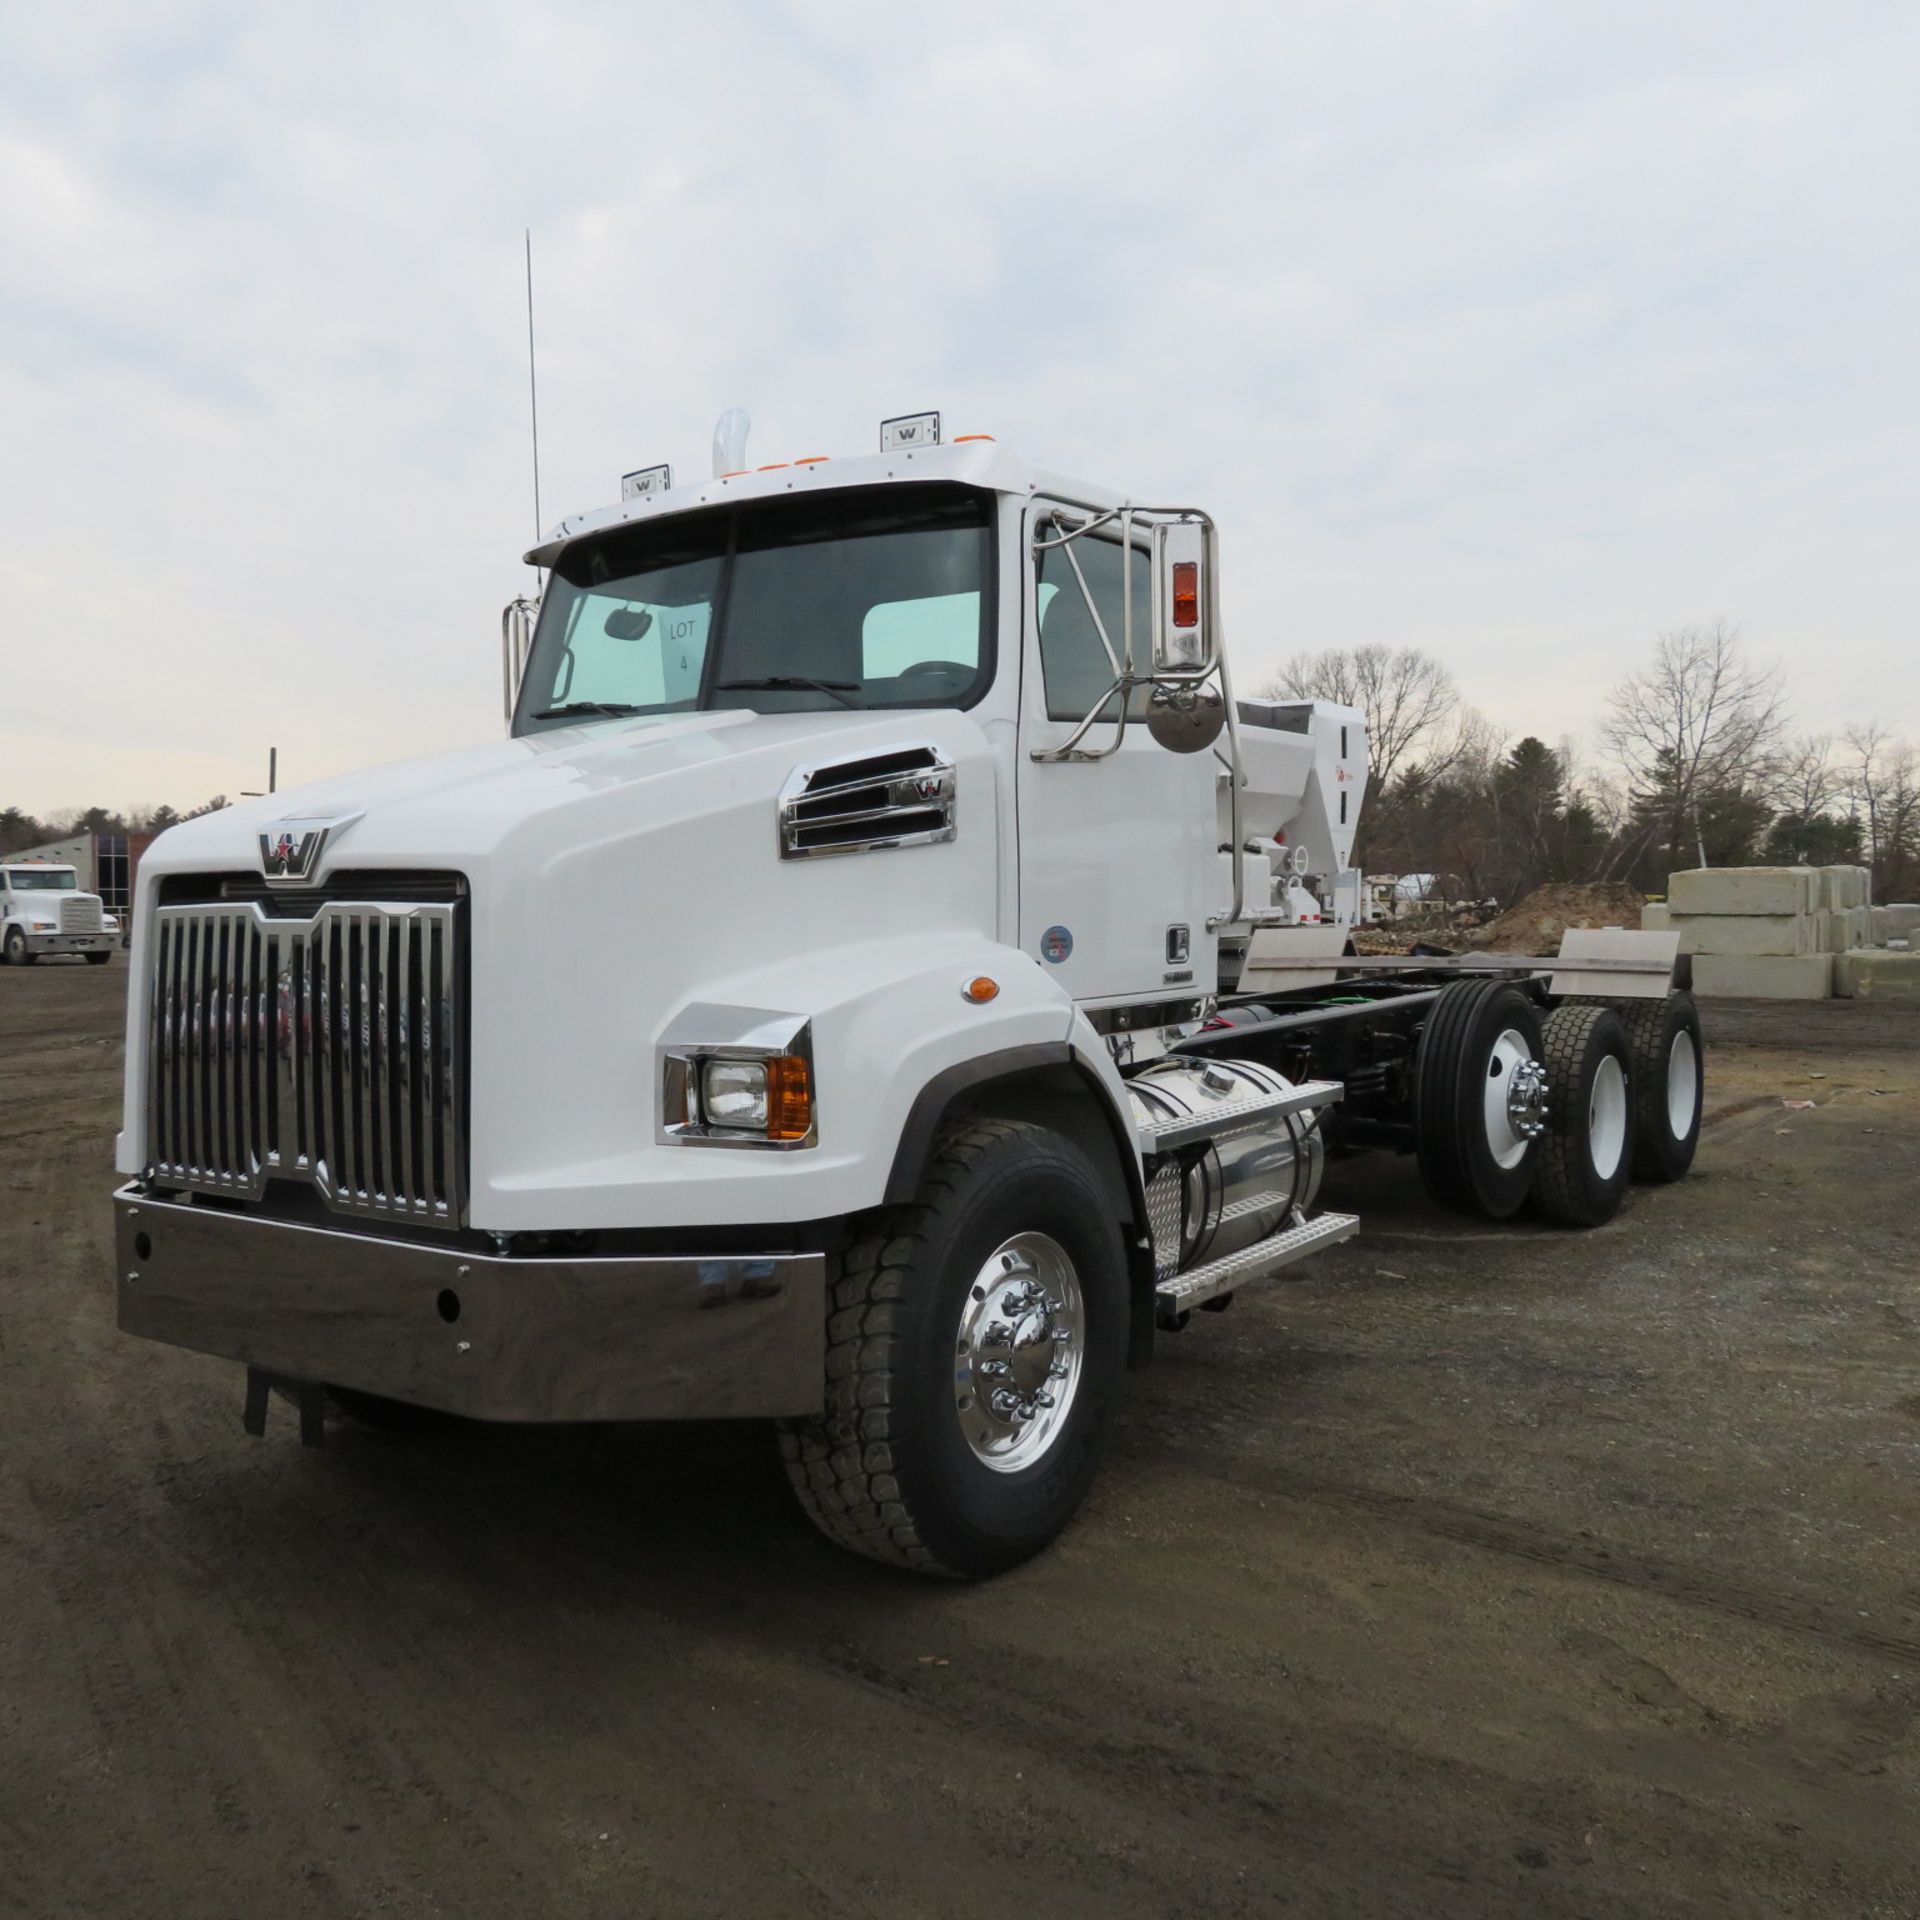 2020 Western Star #4700SB 12-Wheel Cab and Chassis with Hendrickson 6250, Odom: 47, UNUSED See Desc. - Image 2 of 14